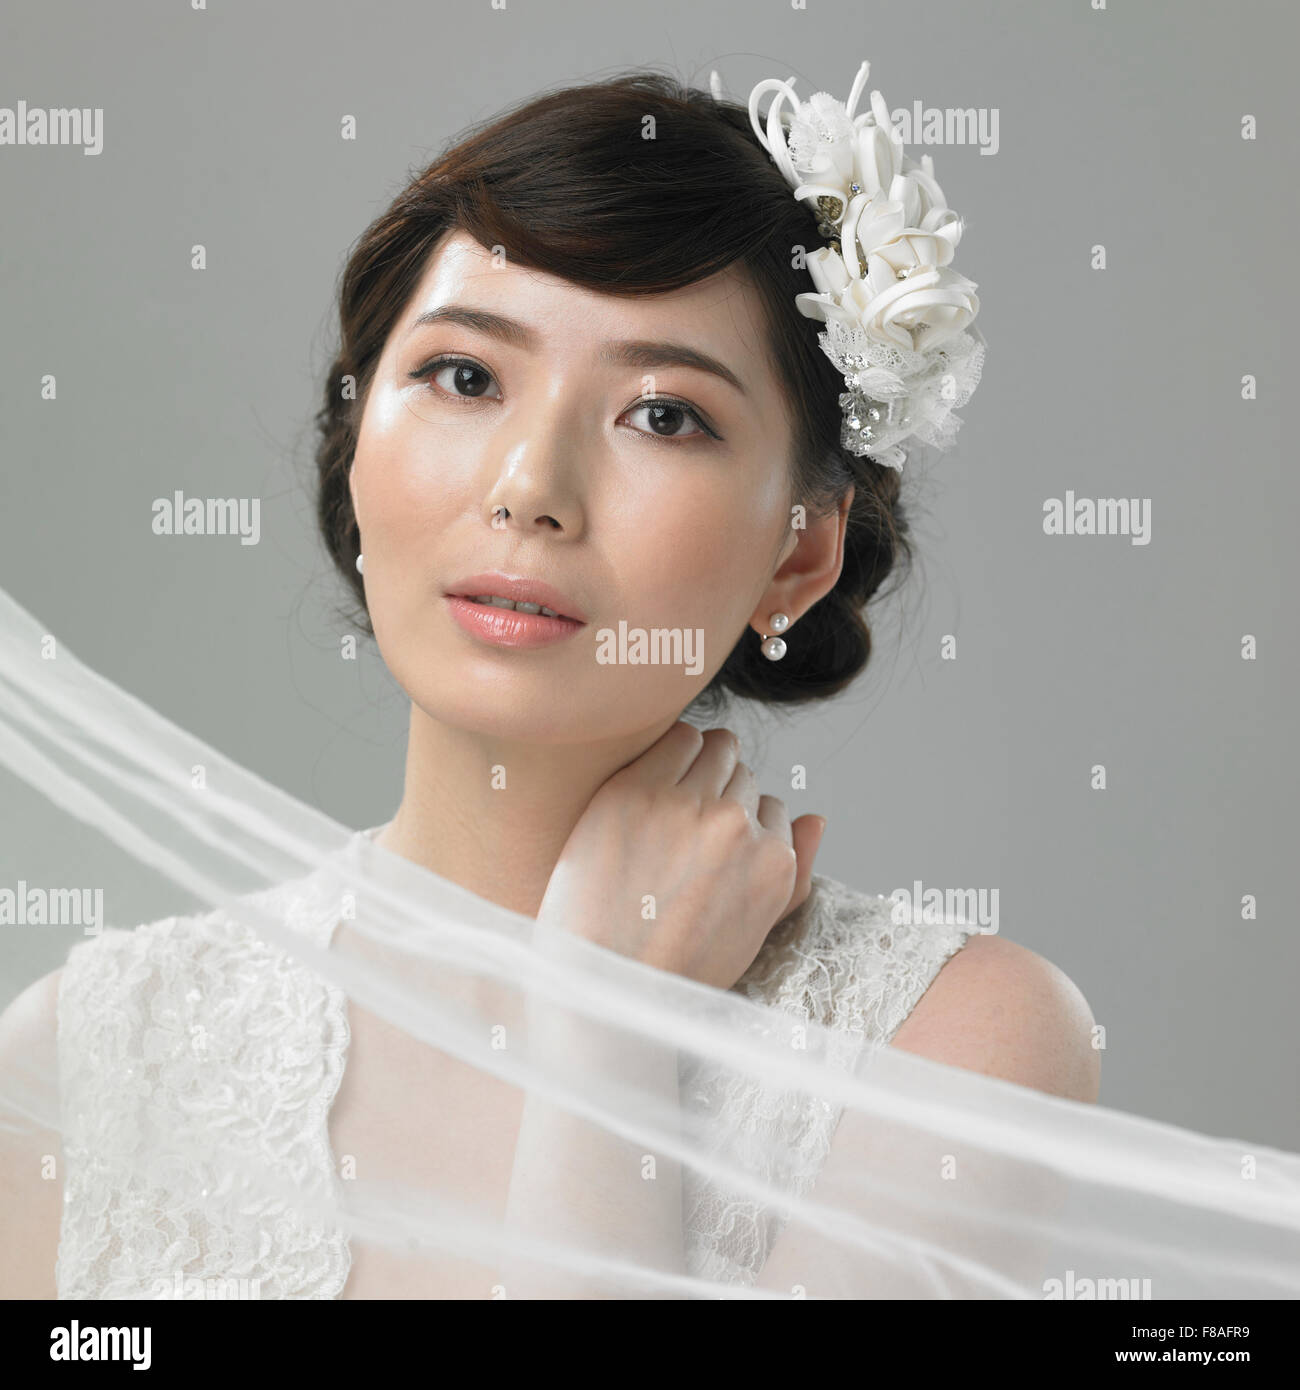 Woman in wedding dress placing her hand on her neck Stock Photo